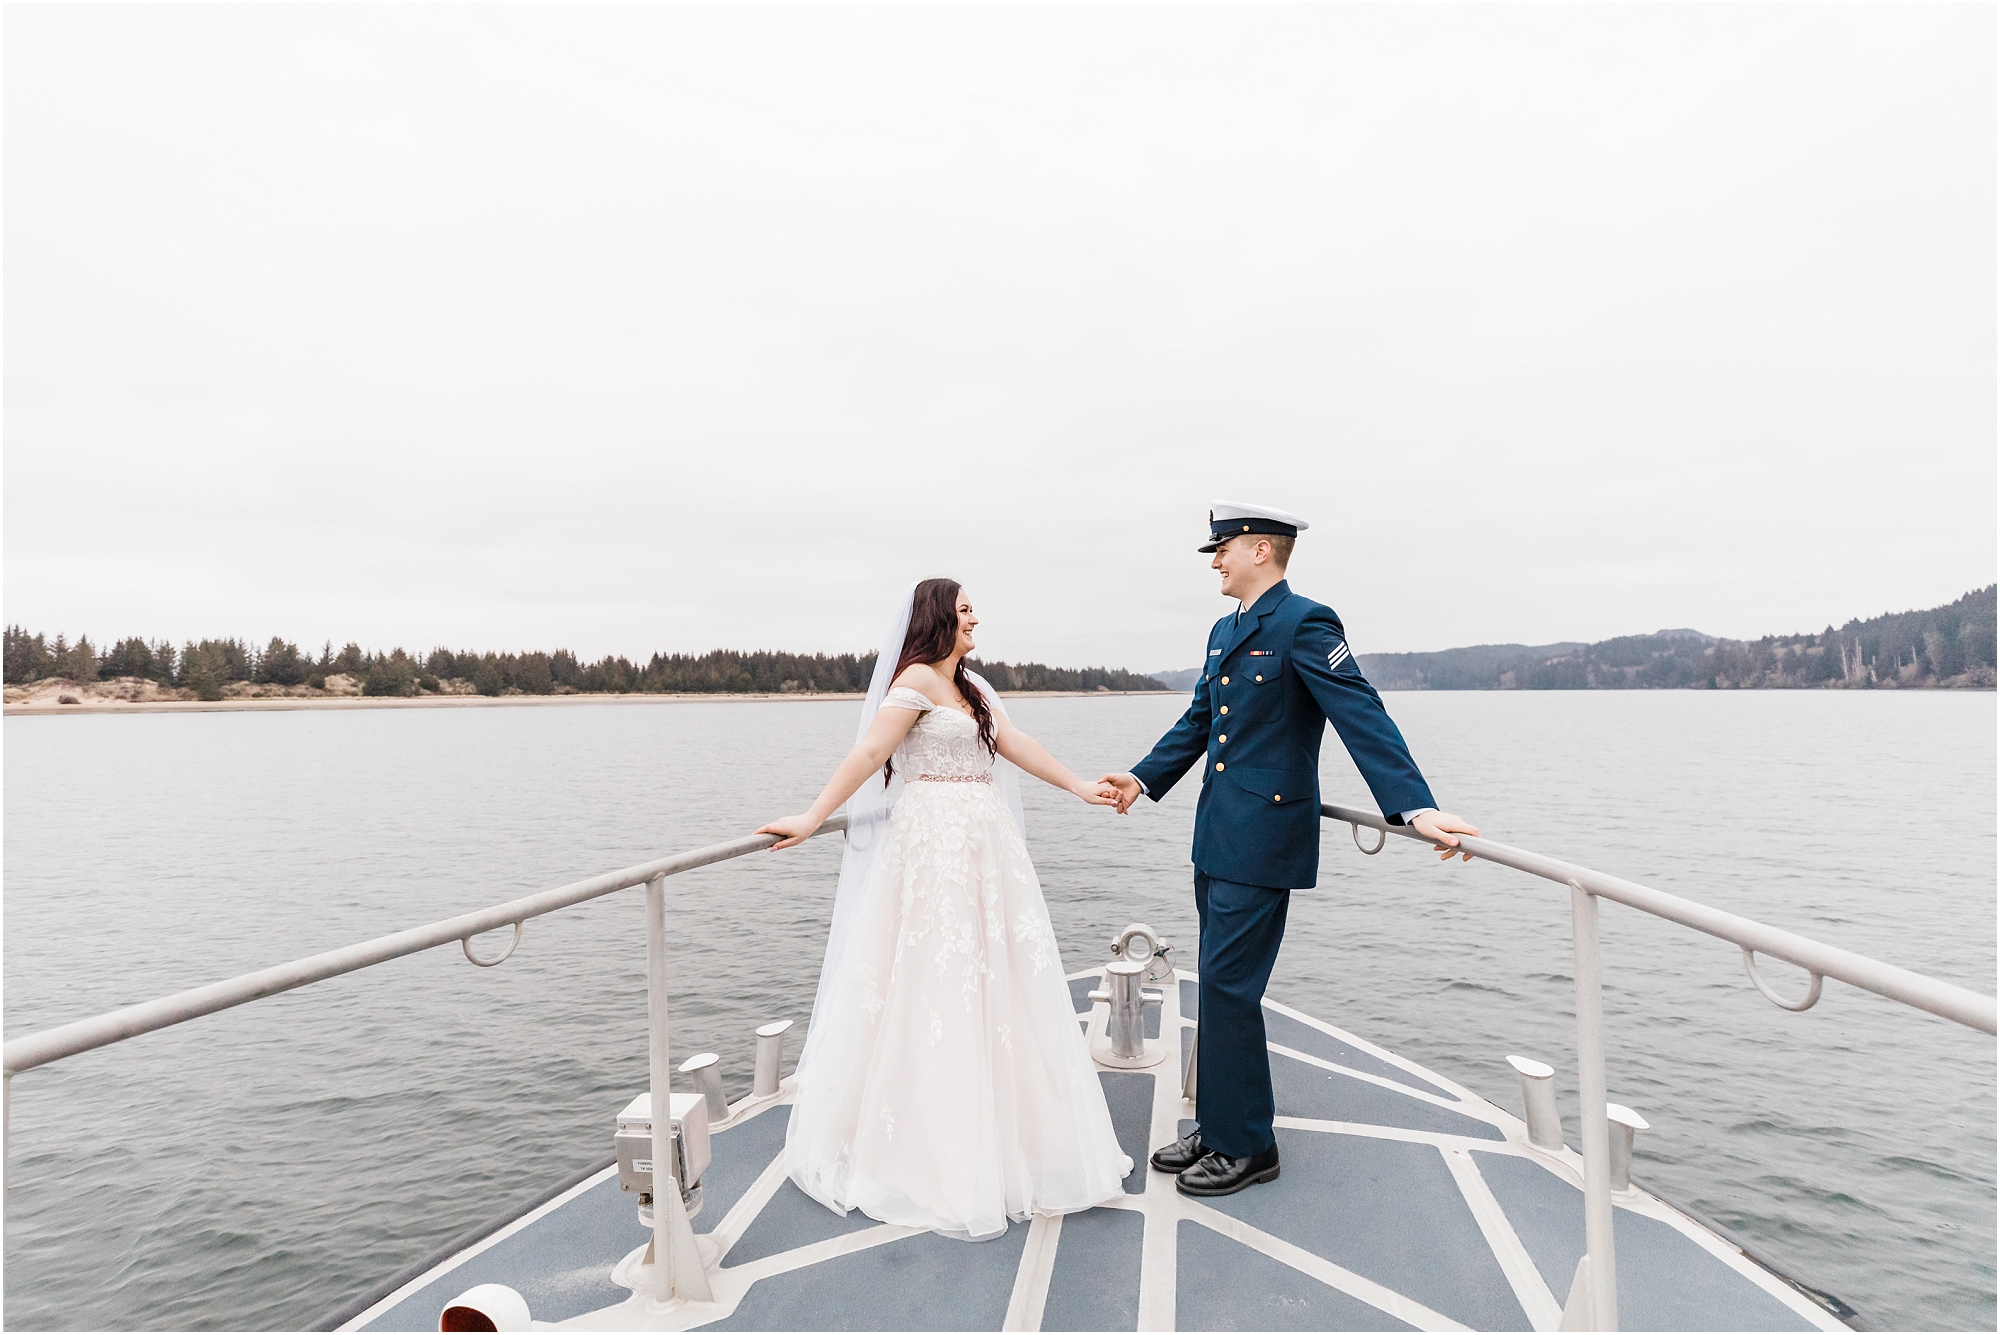 An Oregon Coast Guard elopement, officiated on the deck of the ship in Winchester Bay, Oregon with a groom wearing his navy Coast Guard uniform and a bride wearing a blush pink gown and white veil. | Erica Swantek Photography